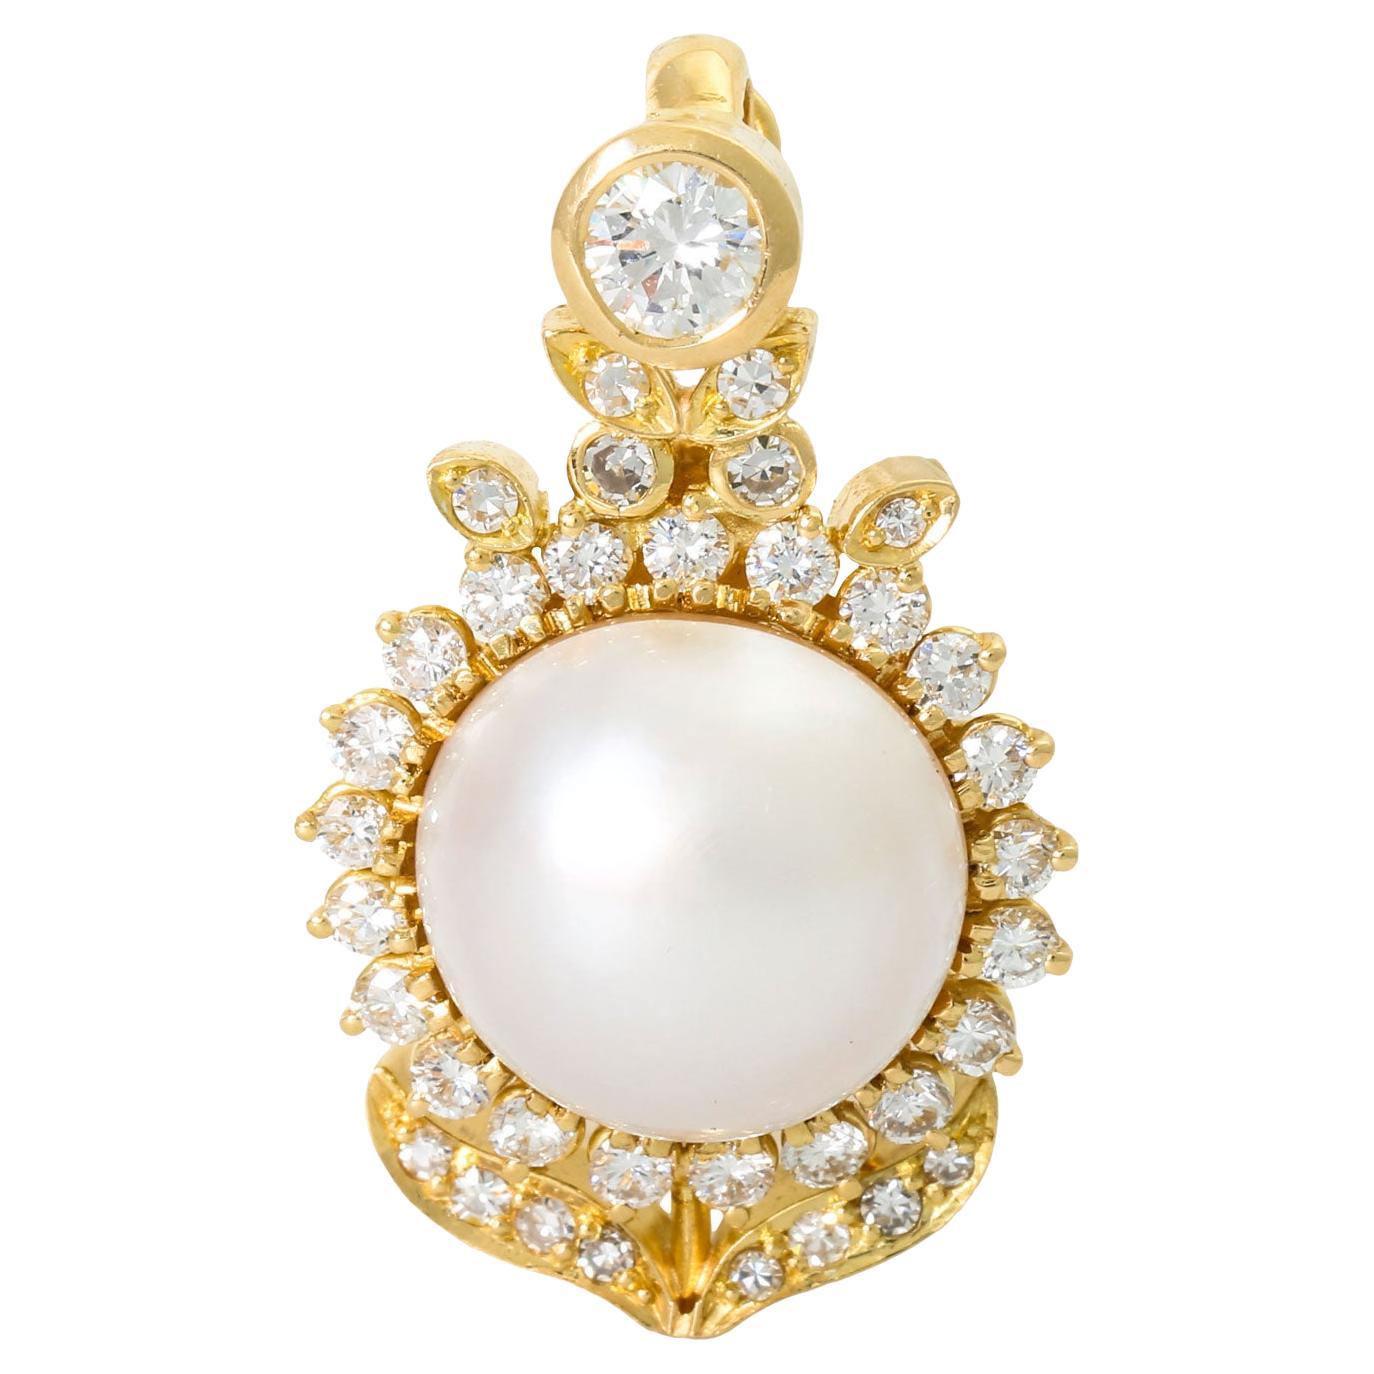 Clip pendant with Mabe pearl and diamonds total approx. 0.7 ct,